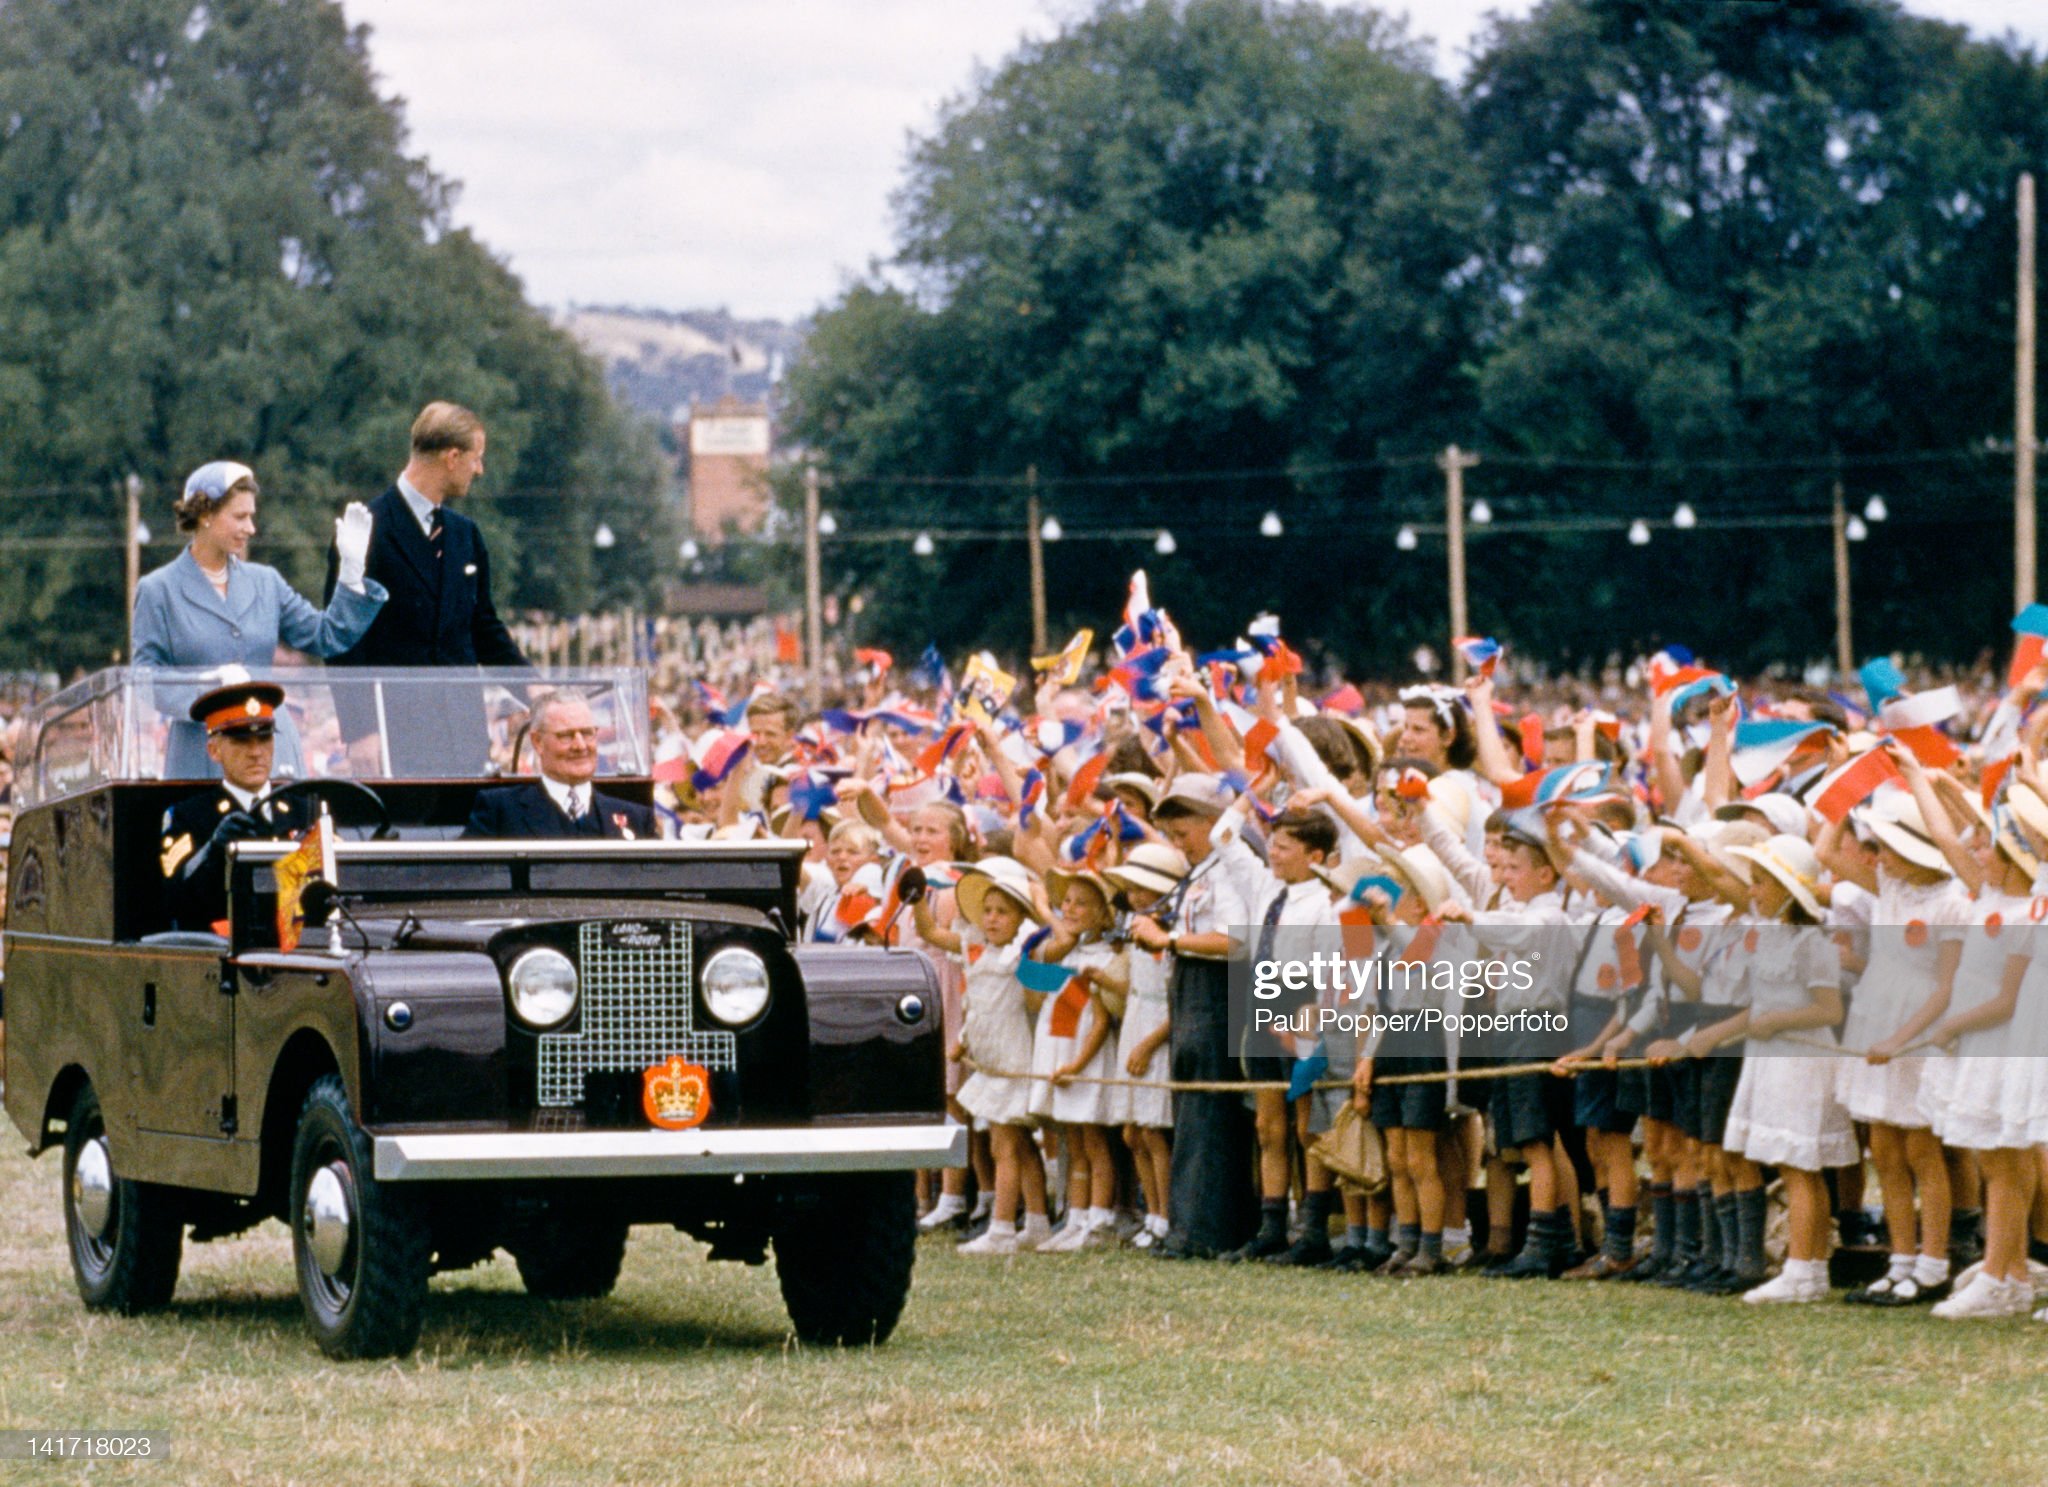 Queen Elizabeth II and Prince Philip waving to a crowd of children in Bathurst.